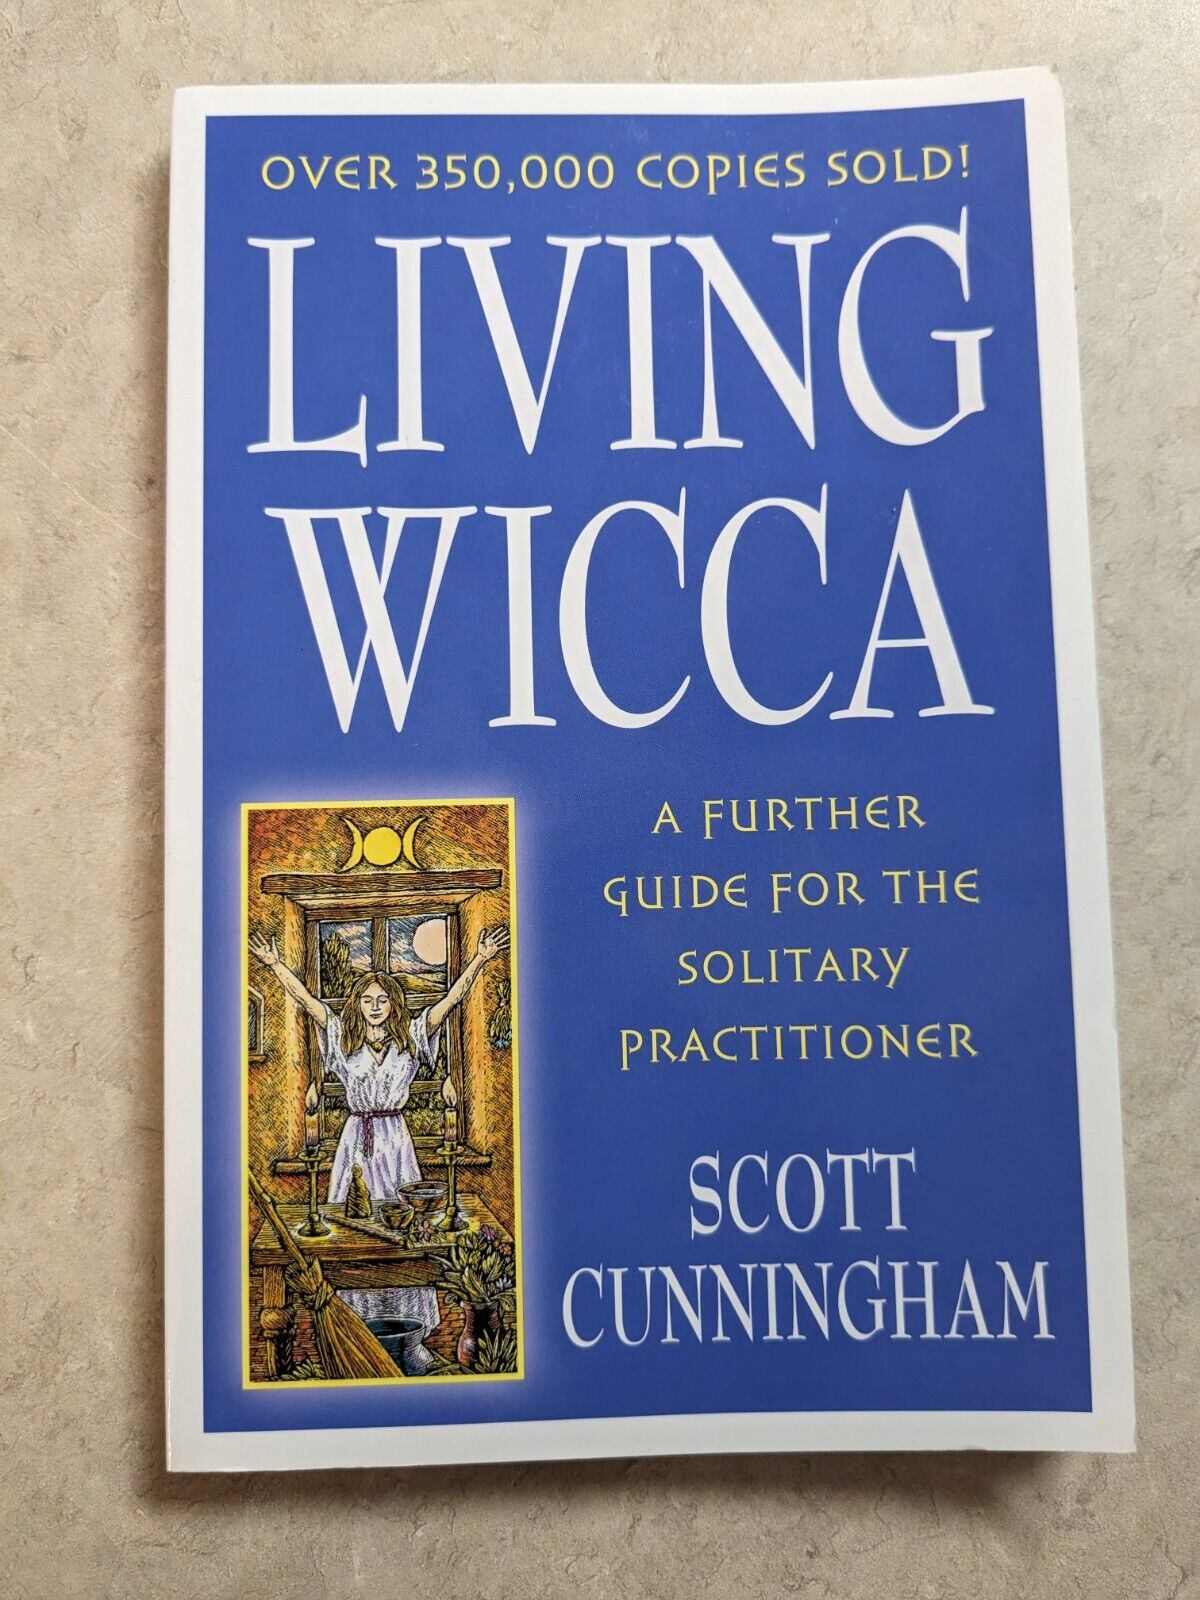 LIVING WICCA - Further Guide For The Solitary Practitioner Scott Cunningham Book